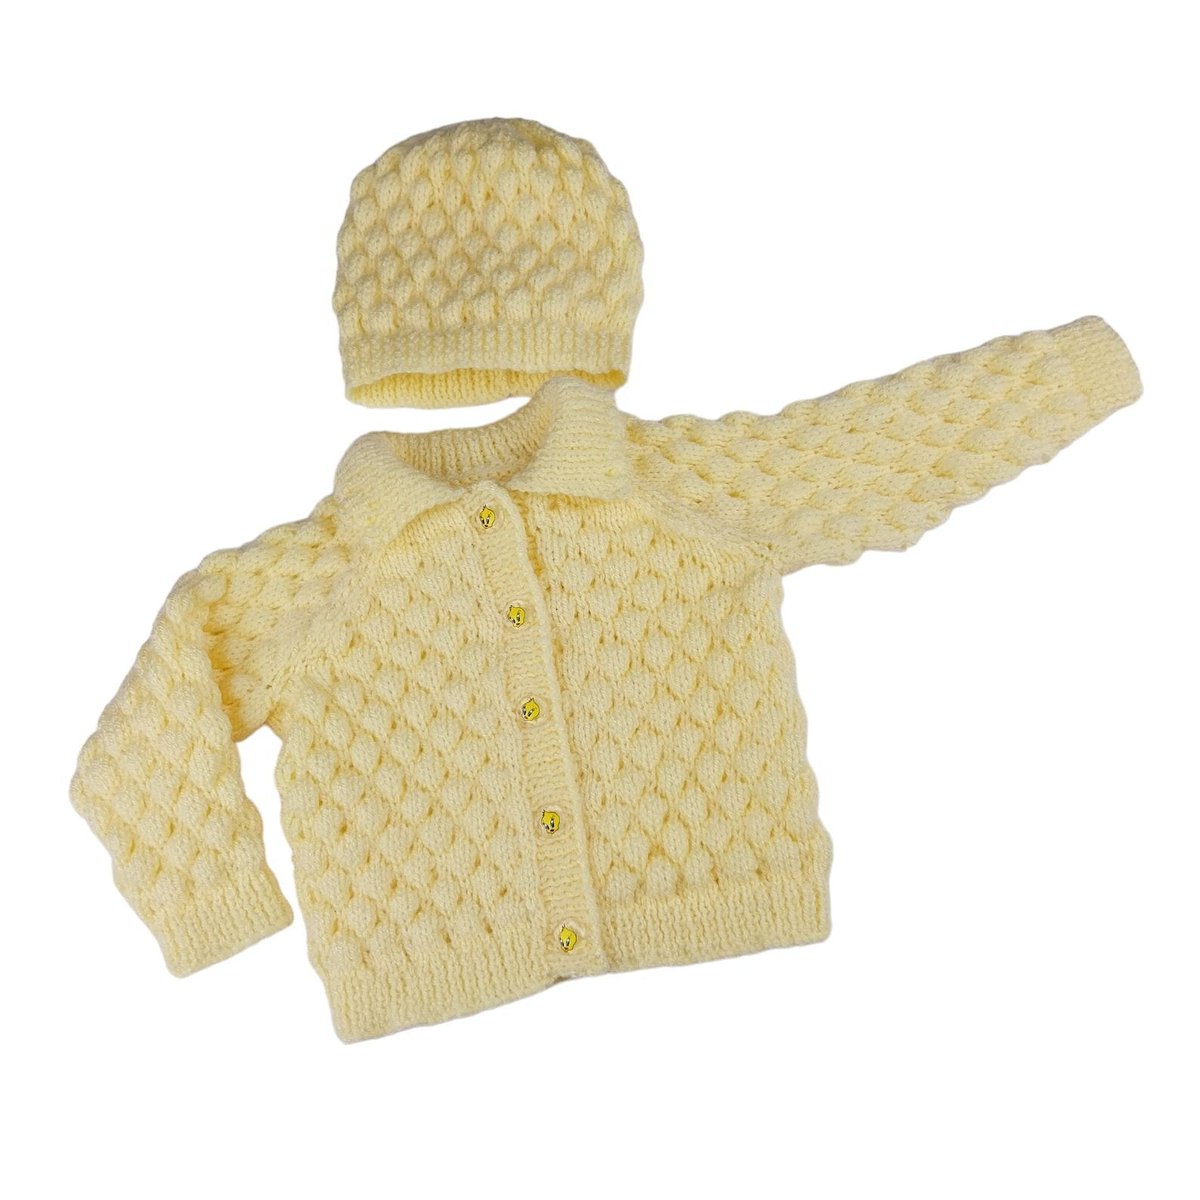 Wrap your little one in warmth with this charming hand-knitted lemon baby cardigan and hat set. Perfectly suited for 0 - 9 months. Shop now! knittingtopia.etsy.com/listing/170276… #knittingtopia #etsy #handmade #babyshowergifts #craftbizparty #MHHSBD